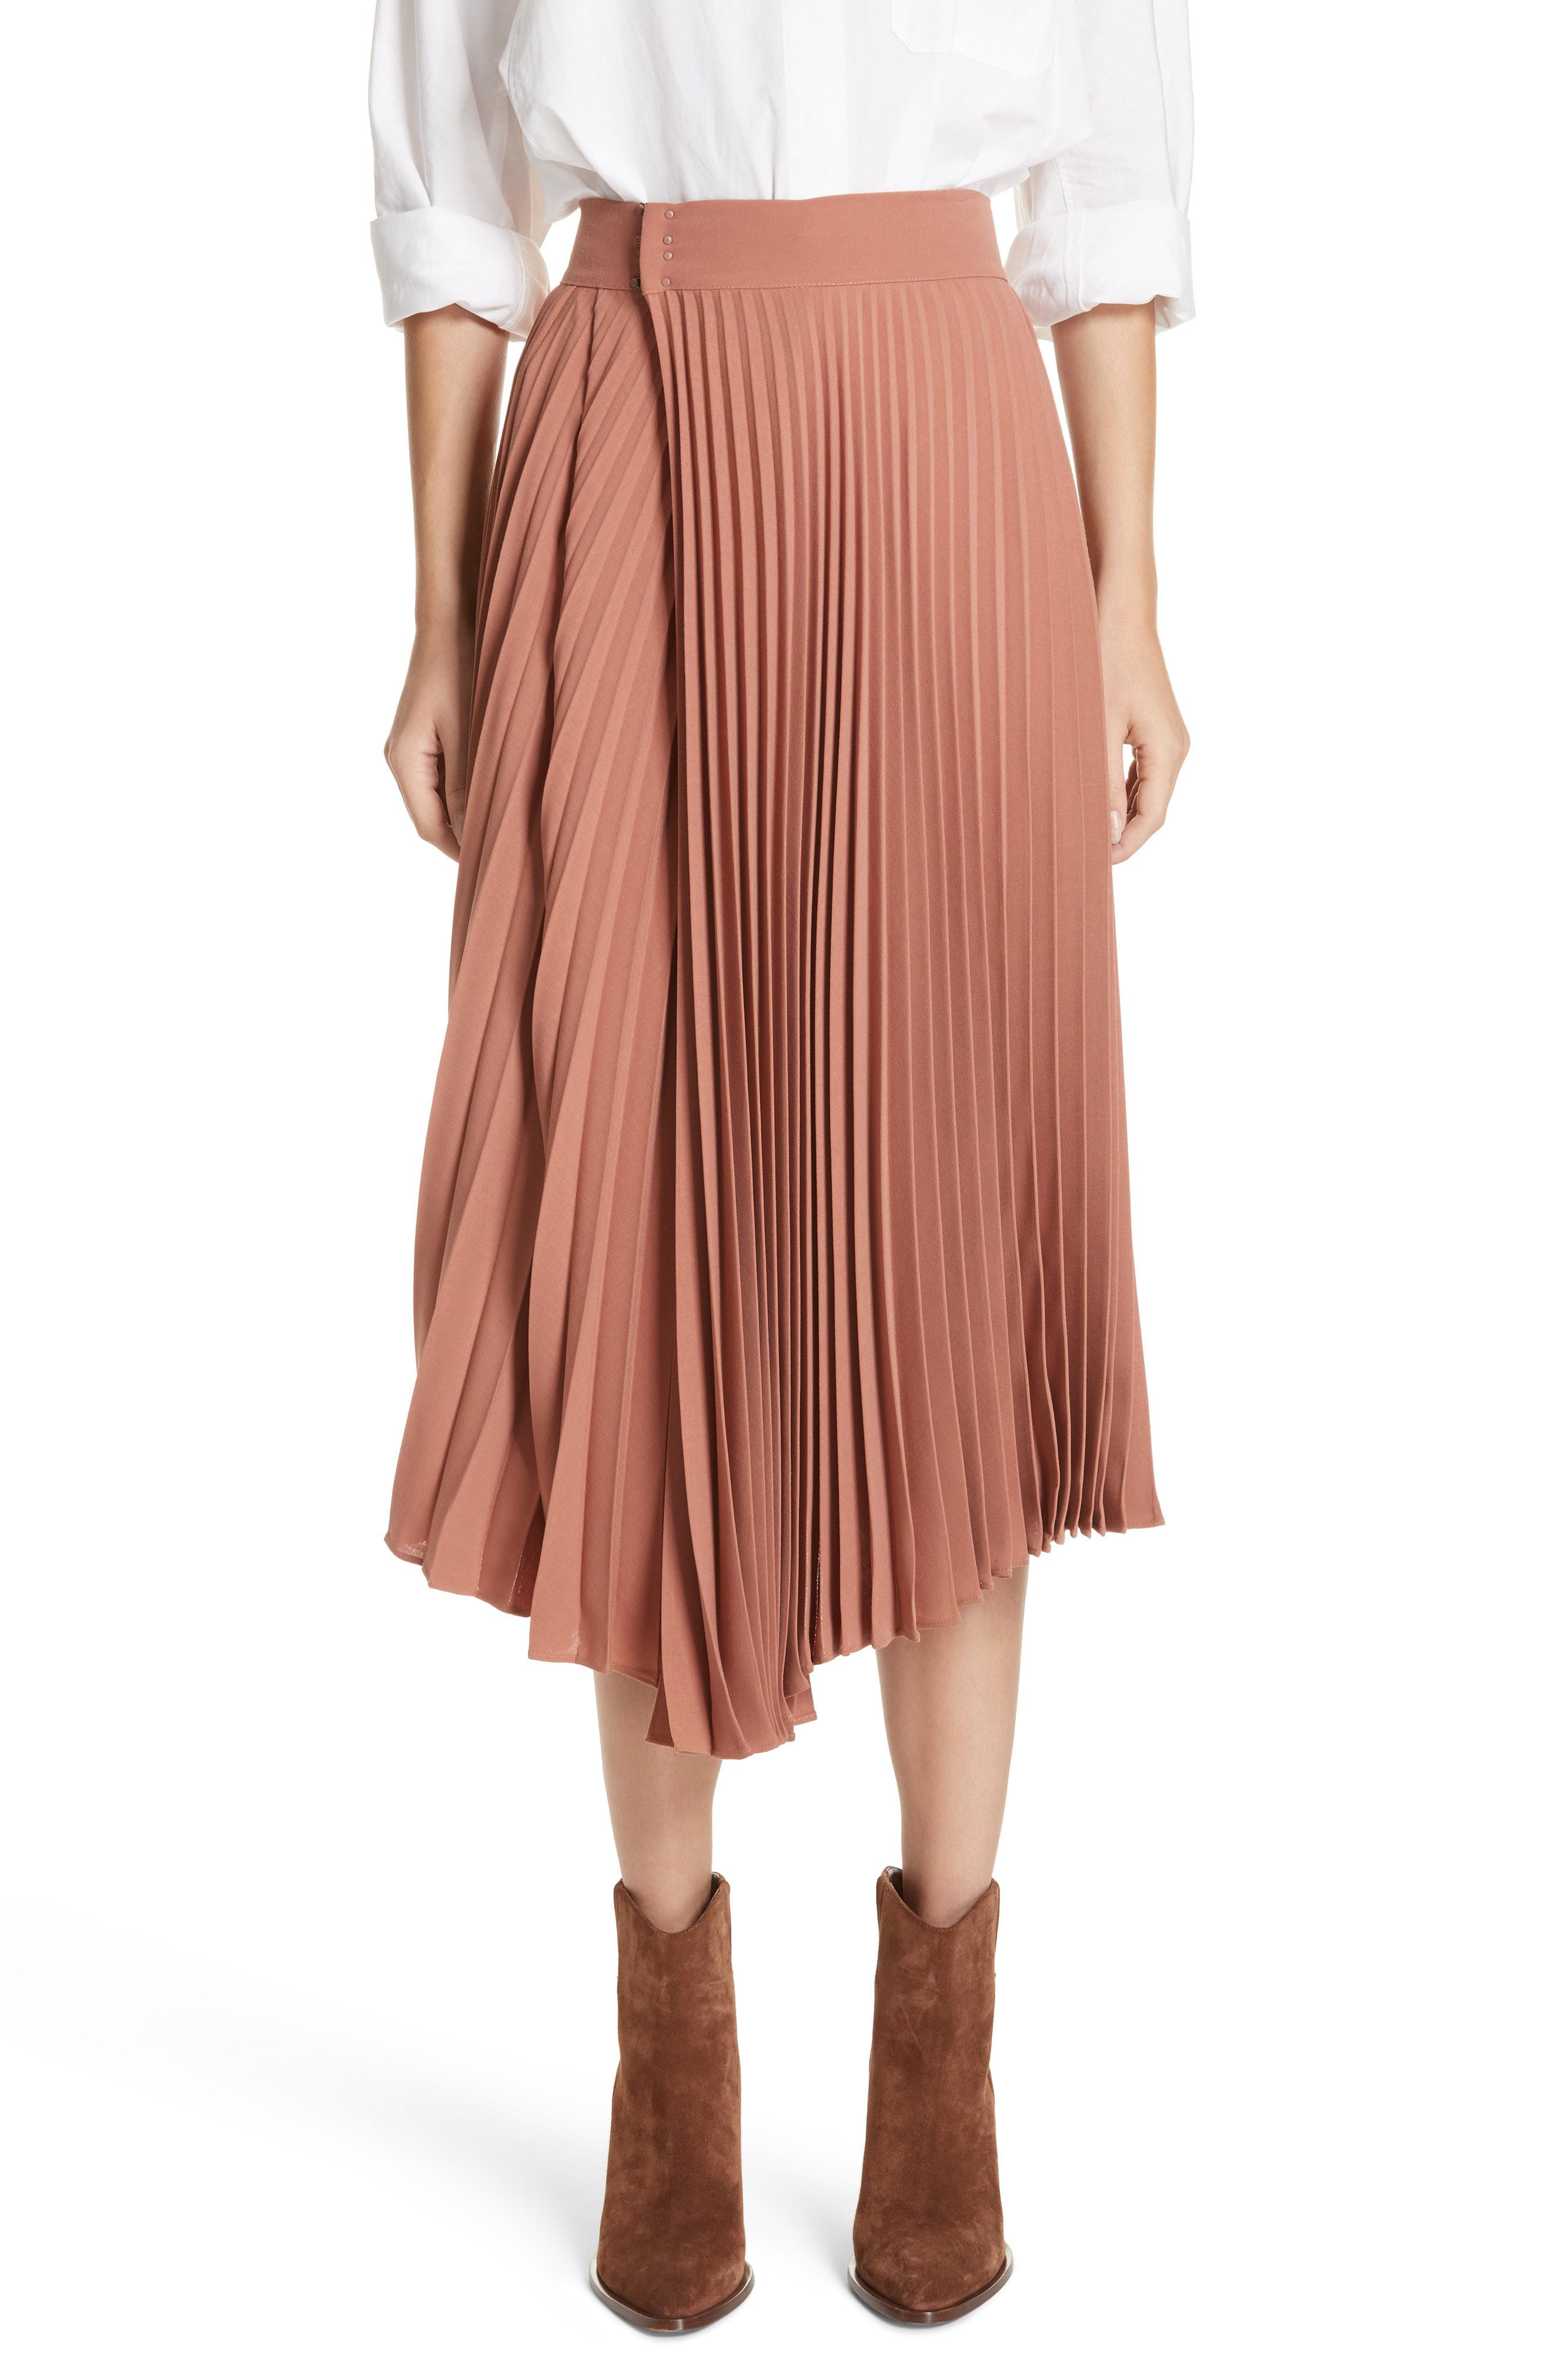 Vince Synthetic Draped Pleated Midi Skirt in Vintage Rose (Pink) - Lyst